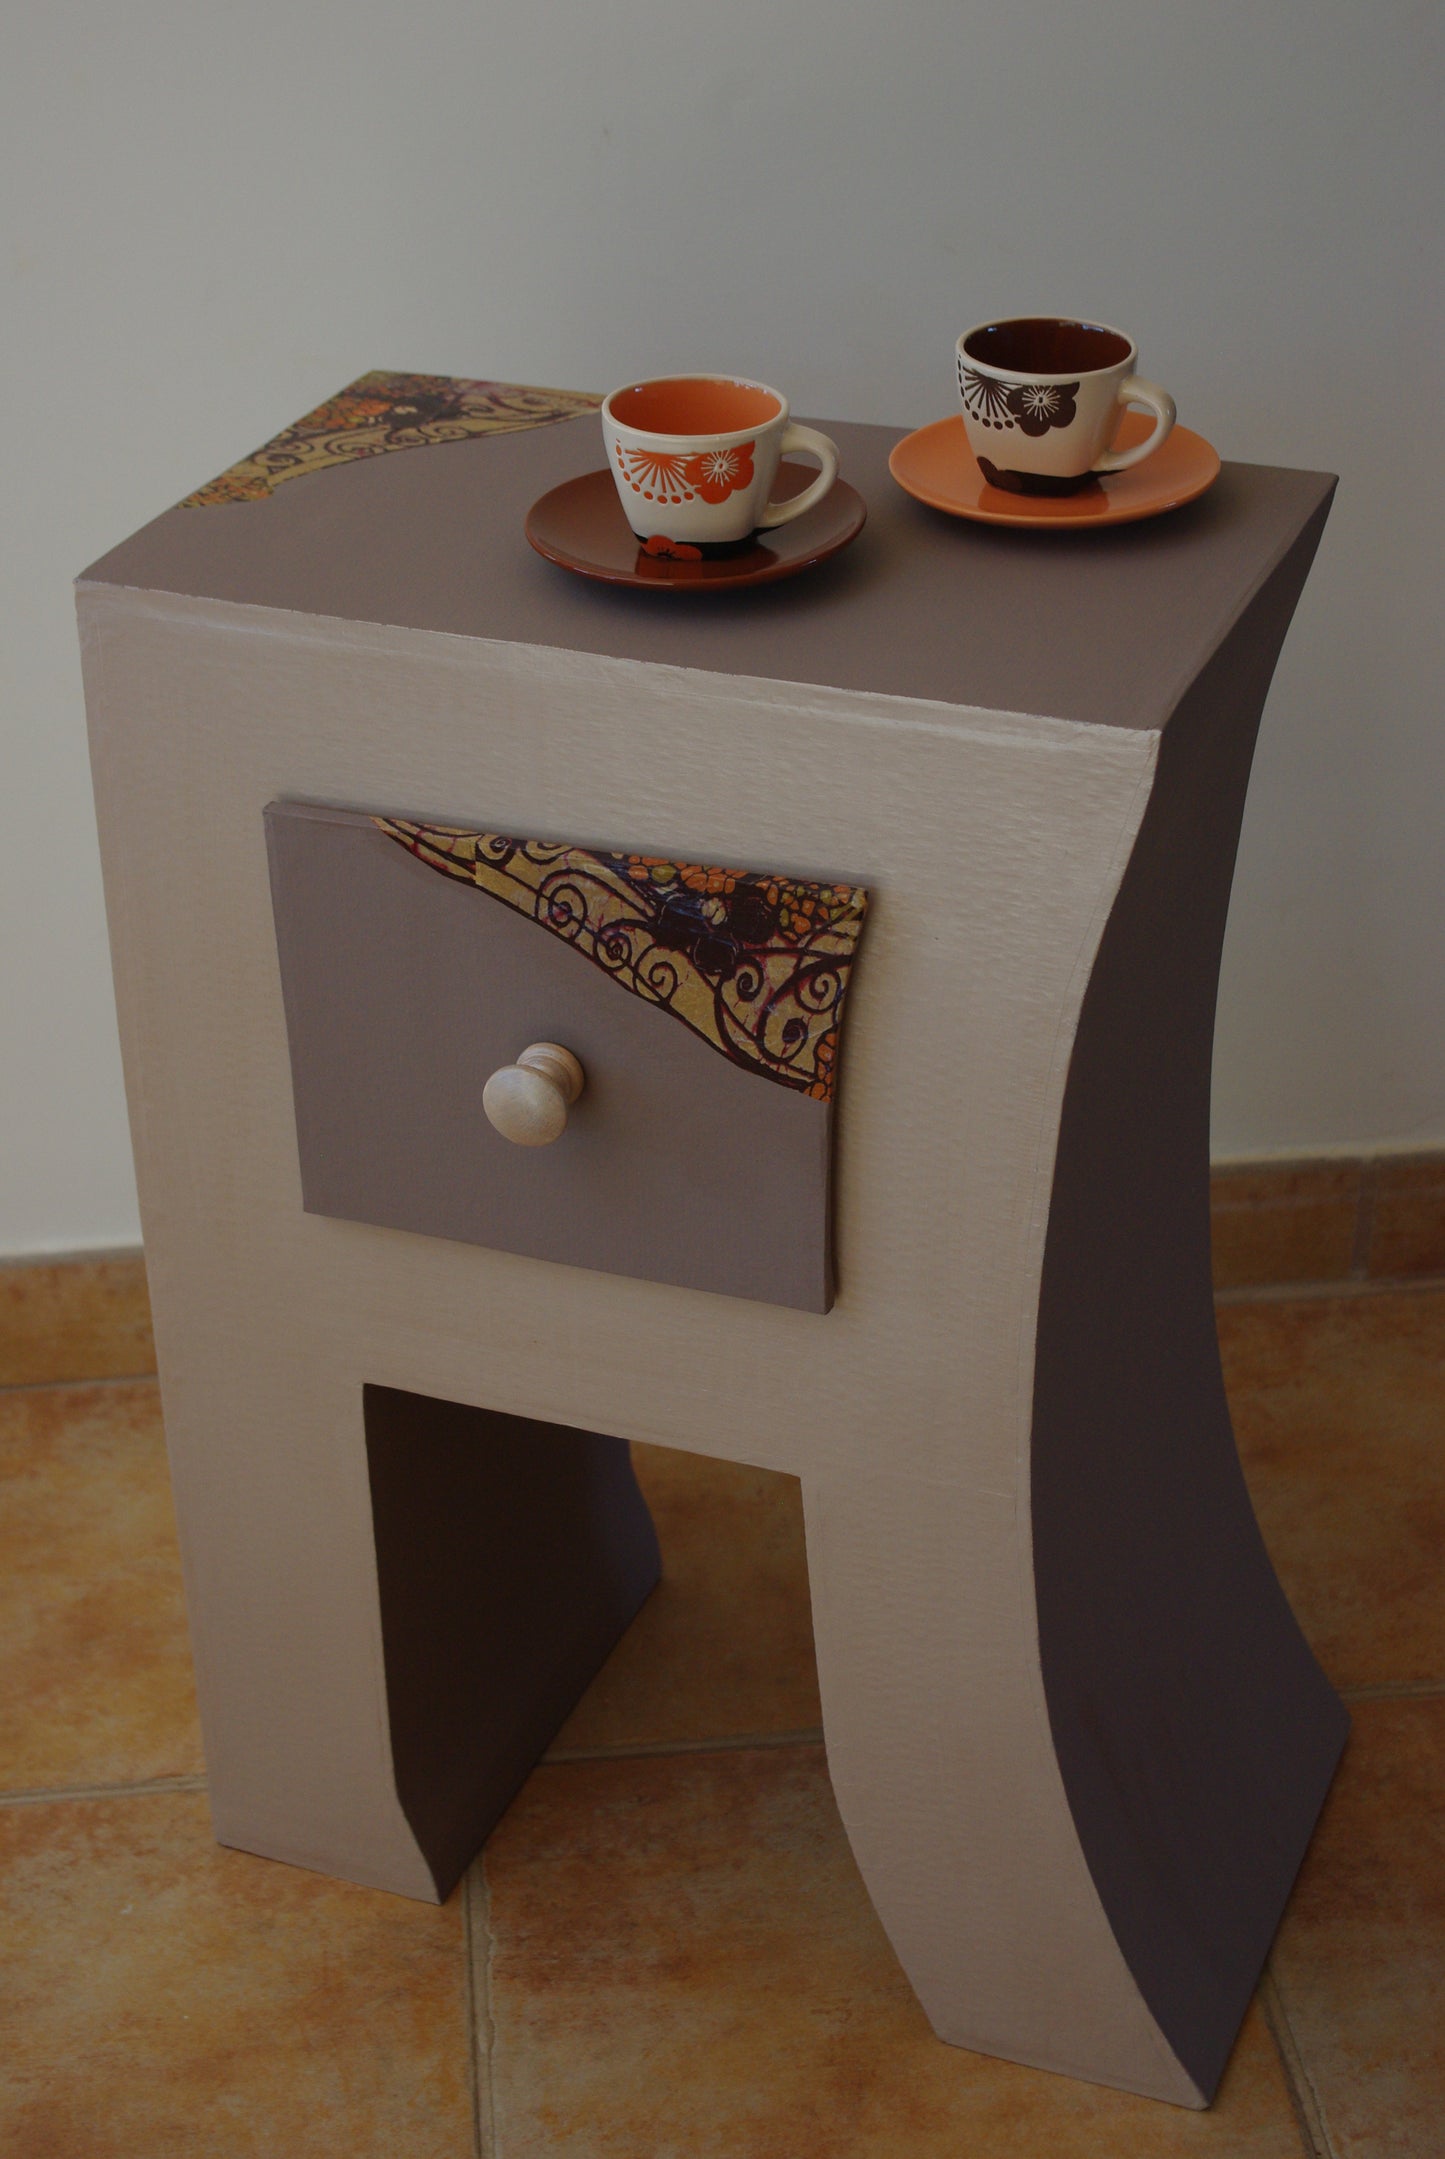 "Cardboard Furniture Construction" Workshop with Maia in Boliqueime, Portugal